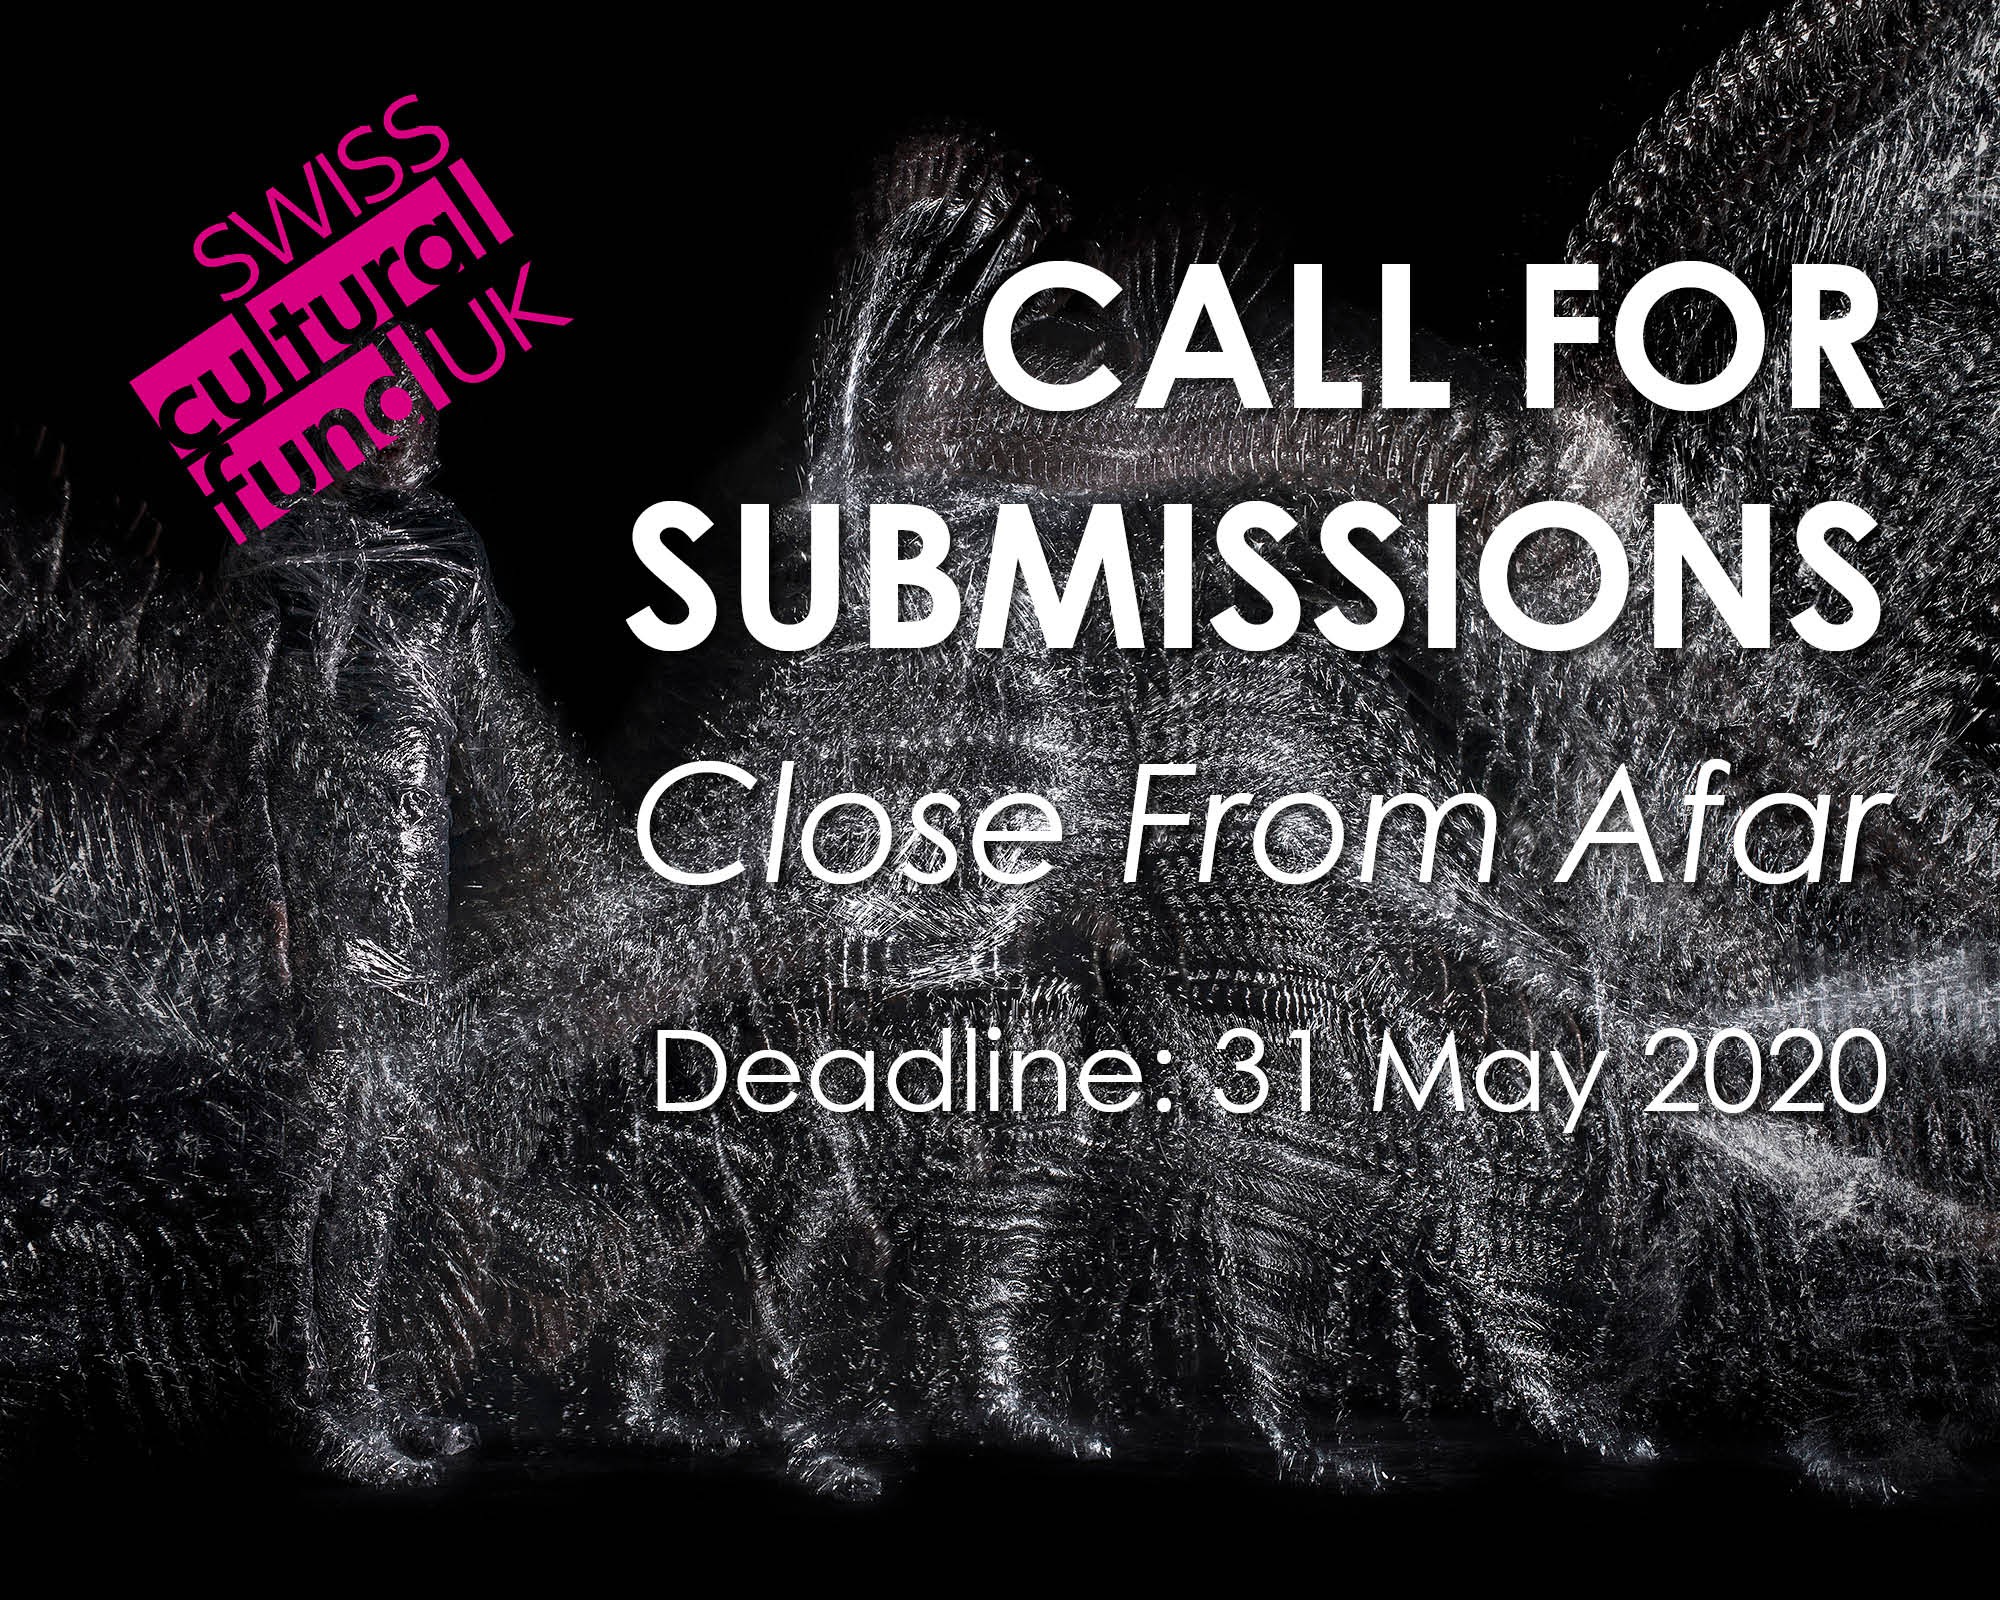 Call_for_submissions_long_deadline